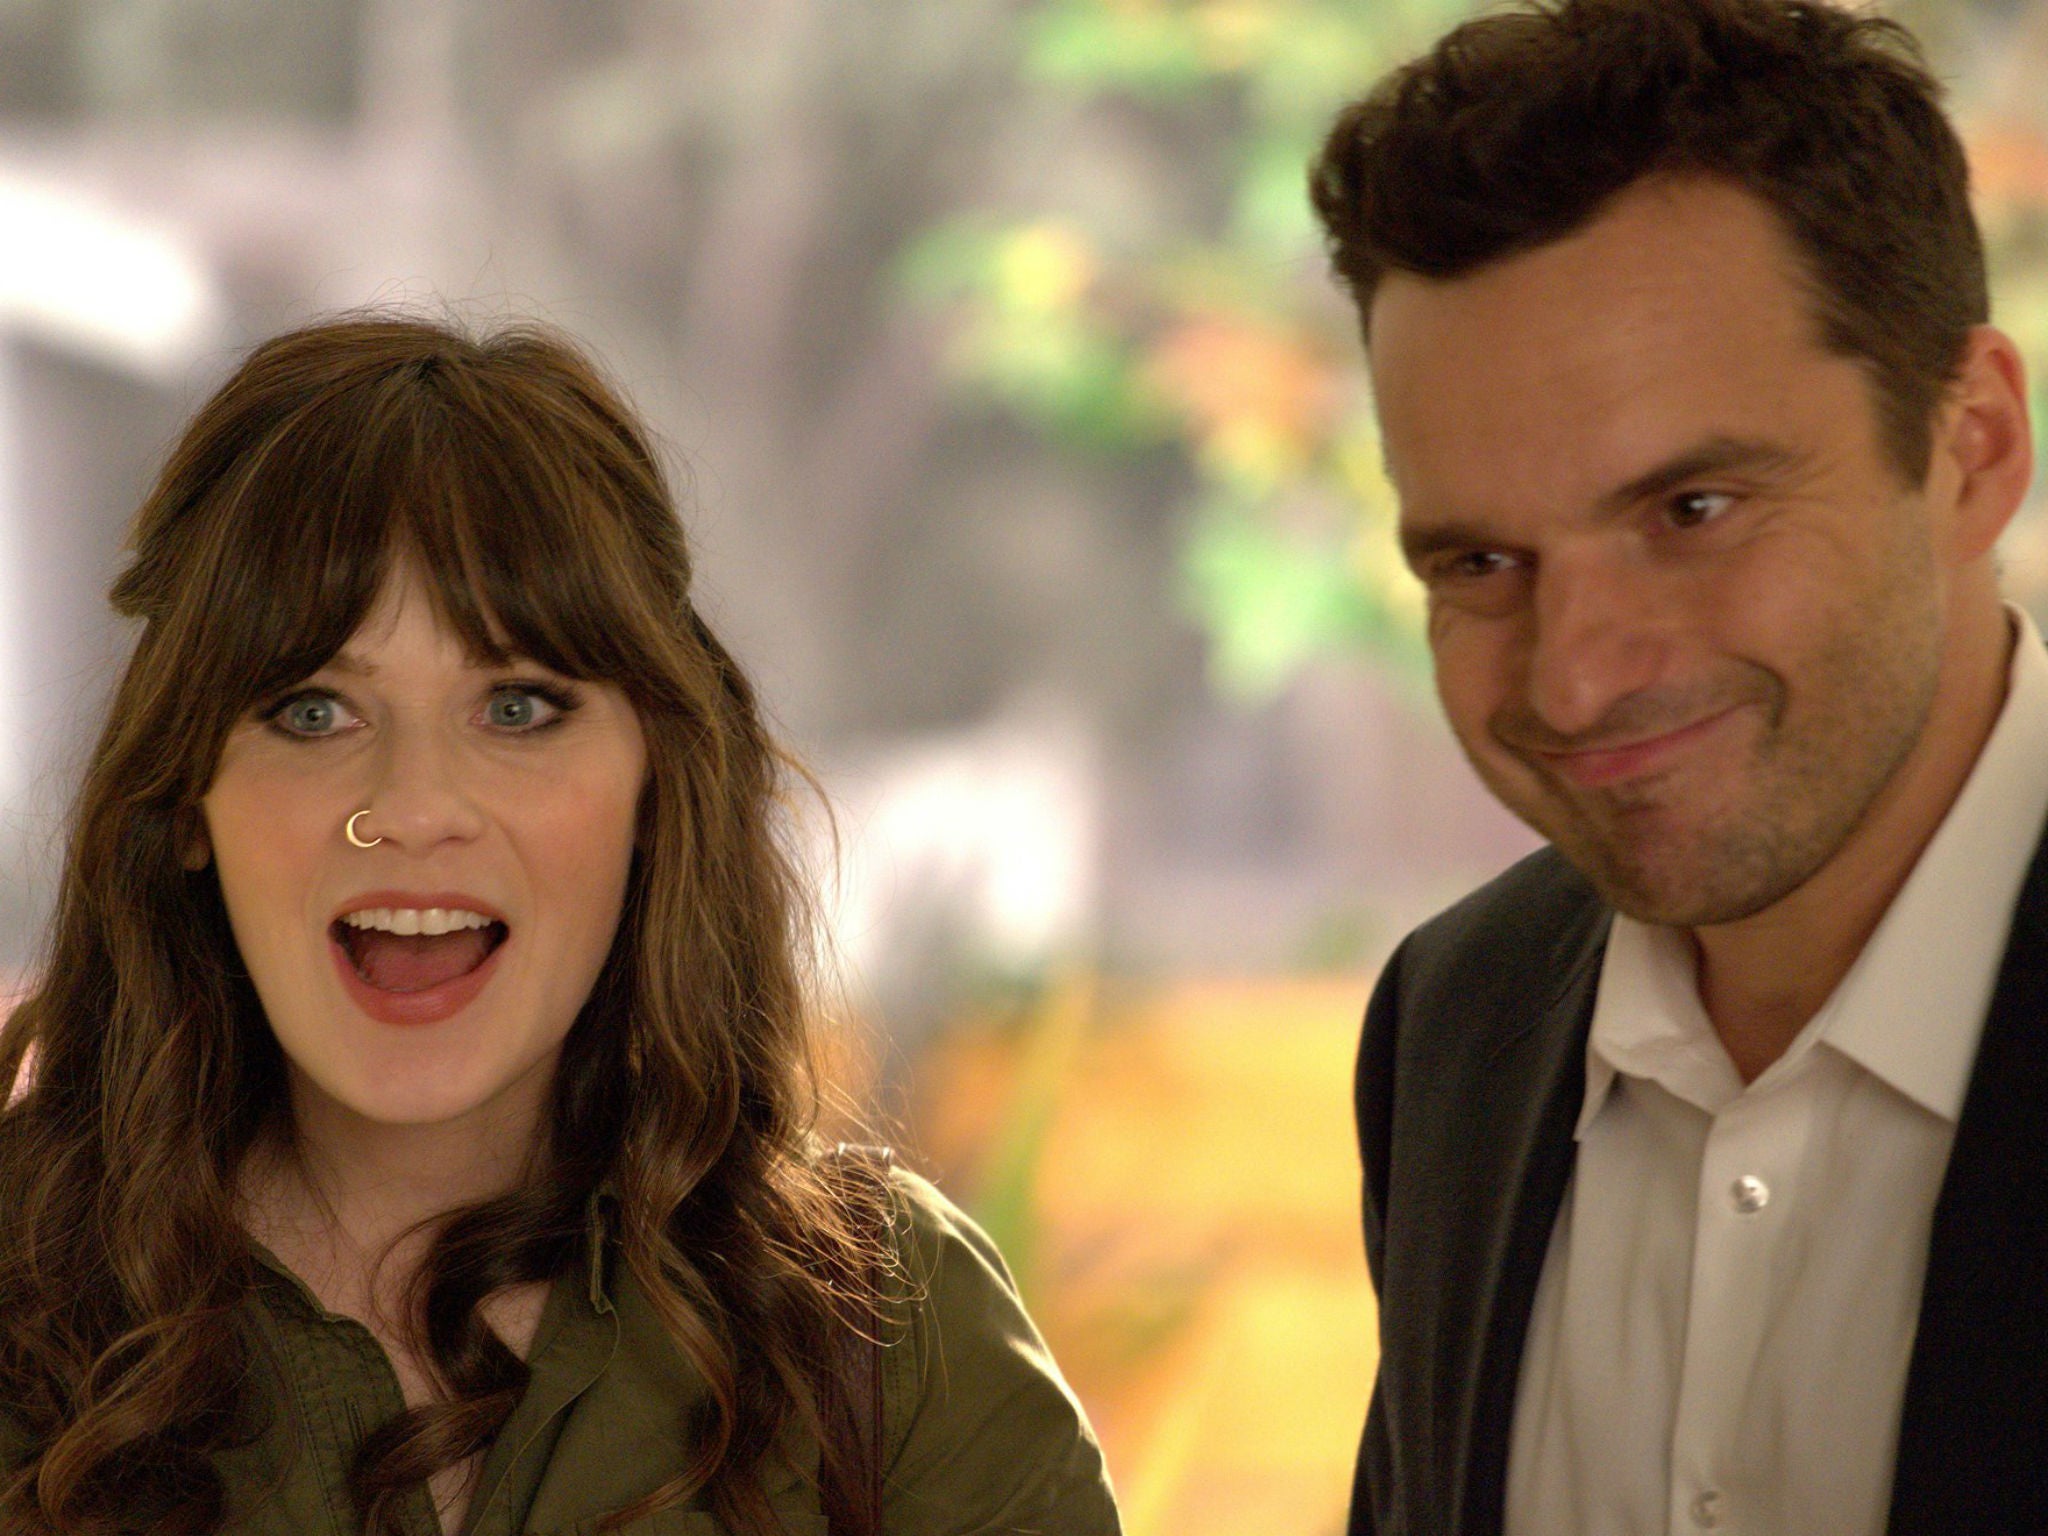 New Girl is the comedy that never changes and that's why we love it